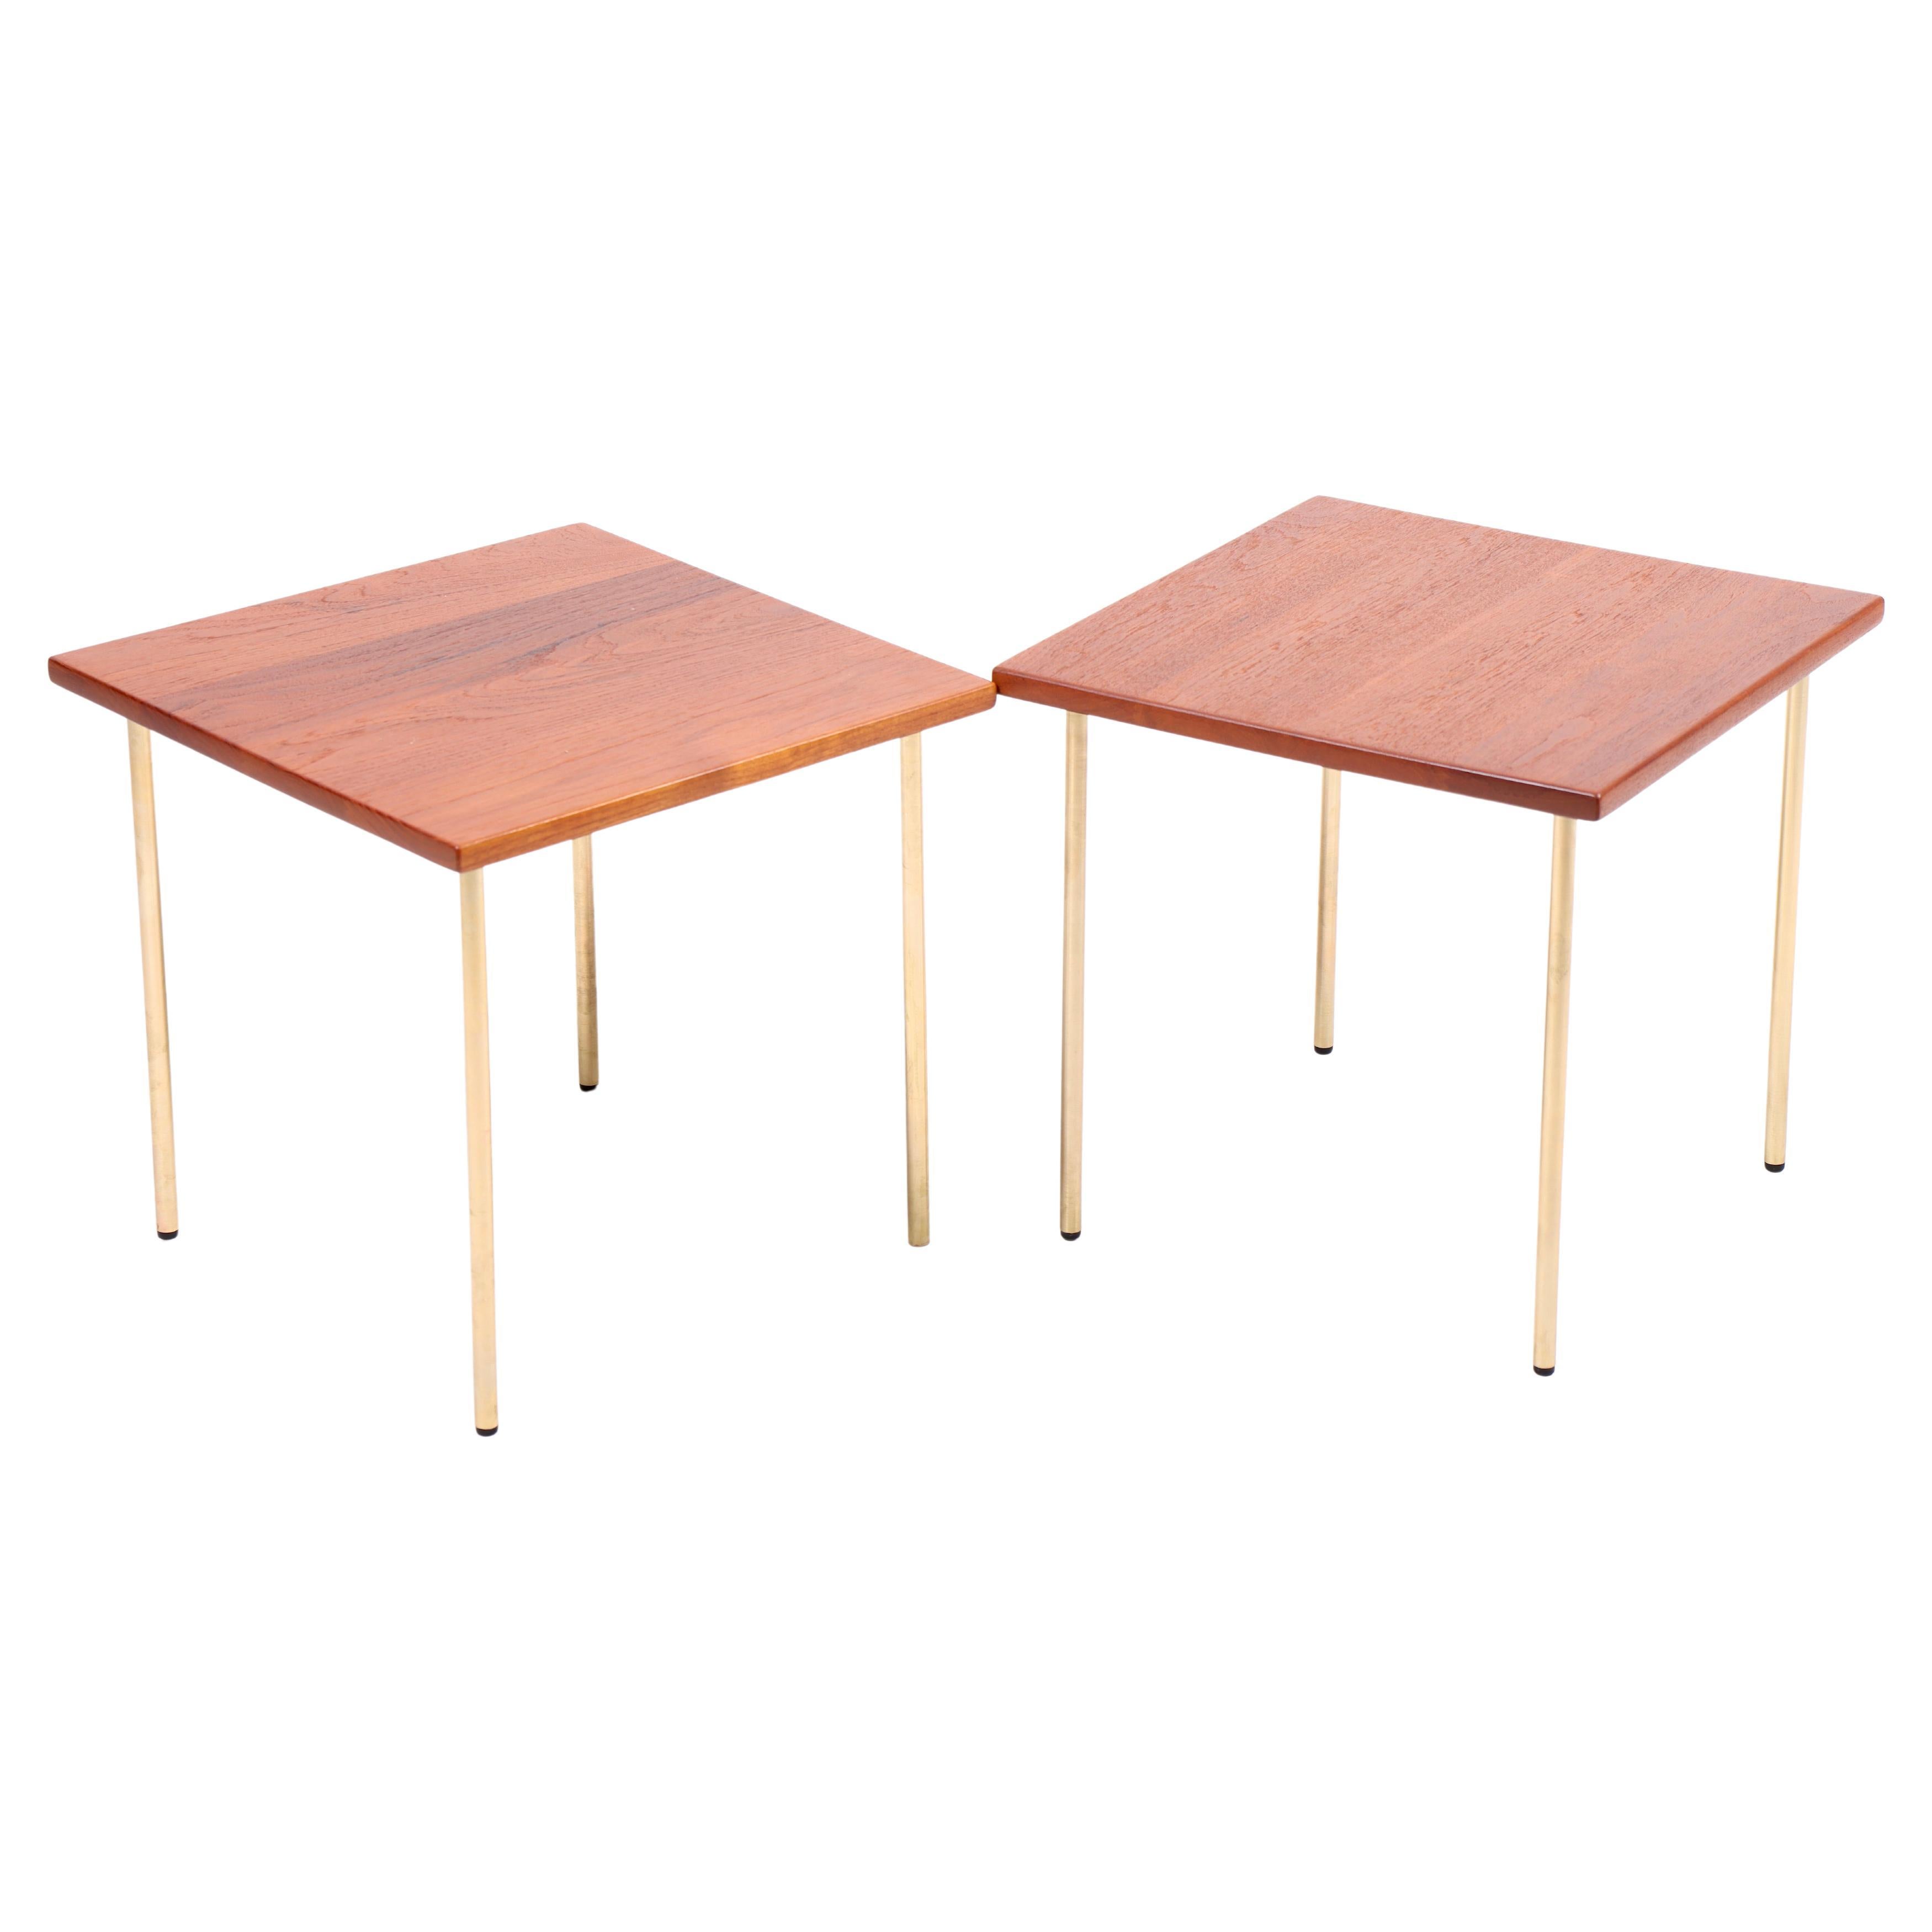 Pair of mid-century side tables in solid teak with brass legs. Designed by Peter Hvidt and Orla Mølgaard for France & Son in 1960s. Made in Denmark. Great original condition.